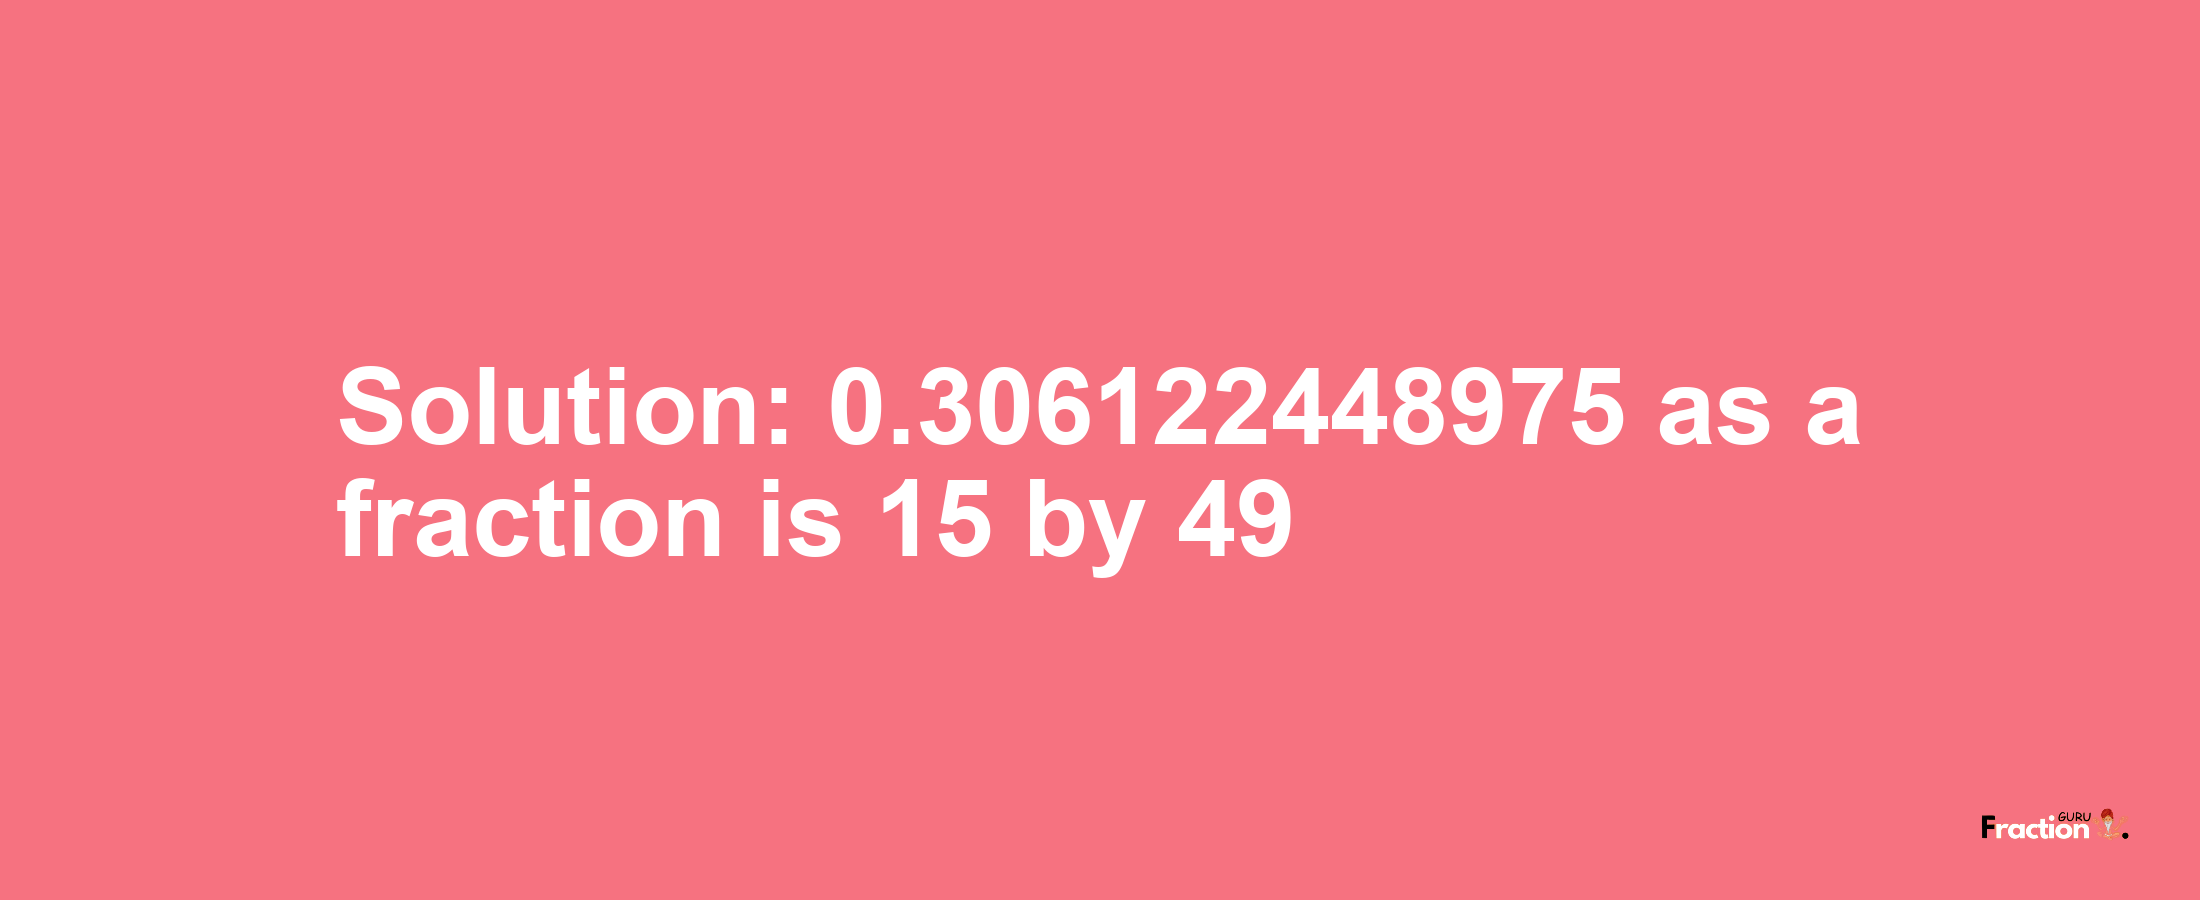 Solution:0.306122448975 as a fraction is 15/49